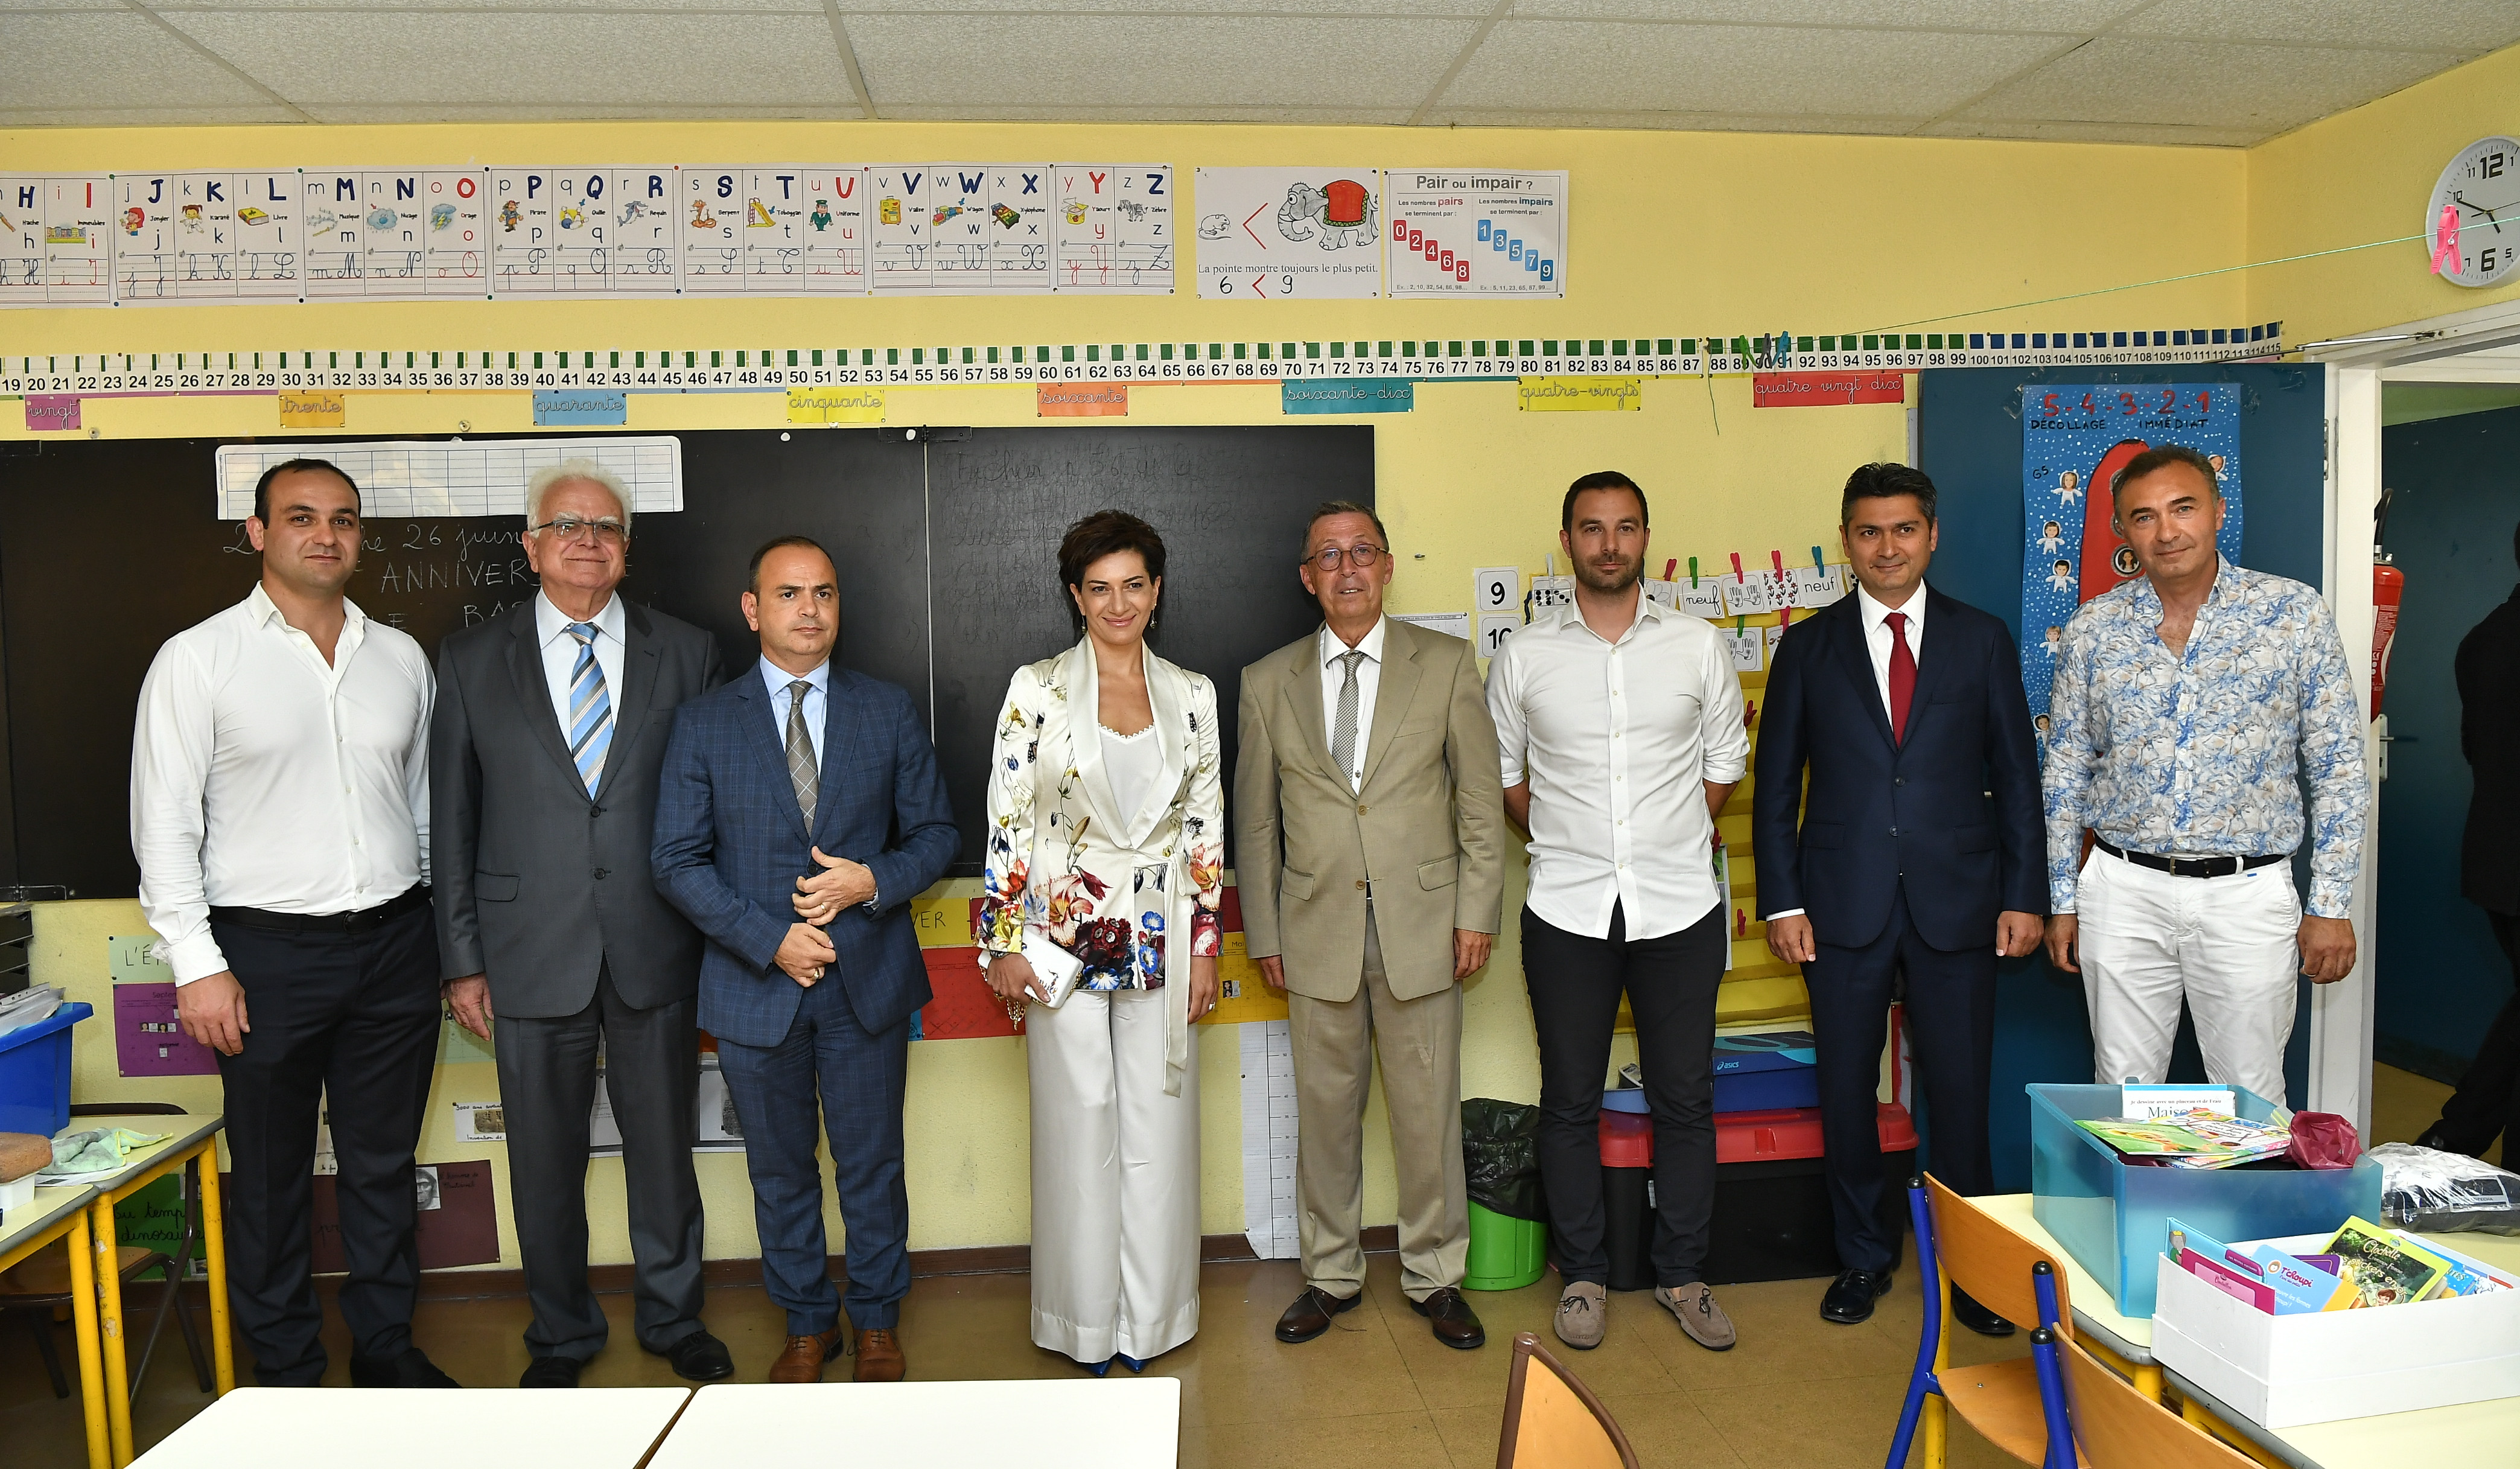 Armenia’s Prime Minister's wife took part in celebration of the 35th anniversary of the Parsamian school in Nice